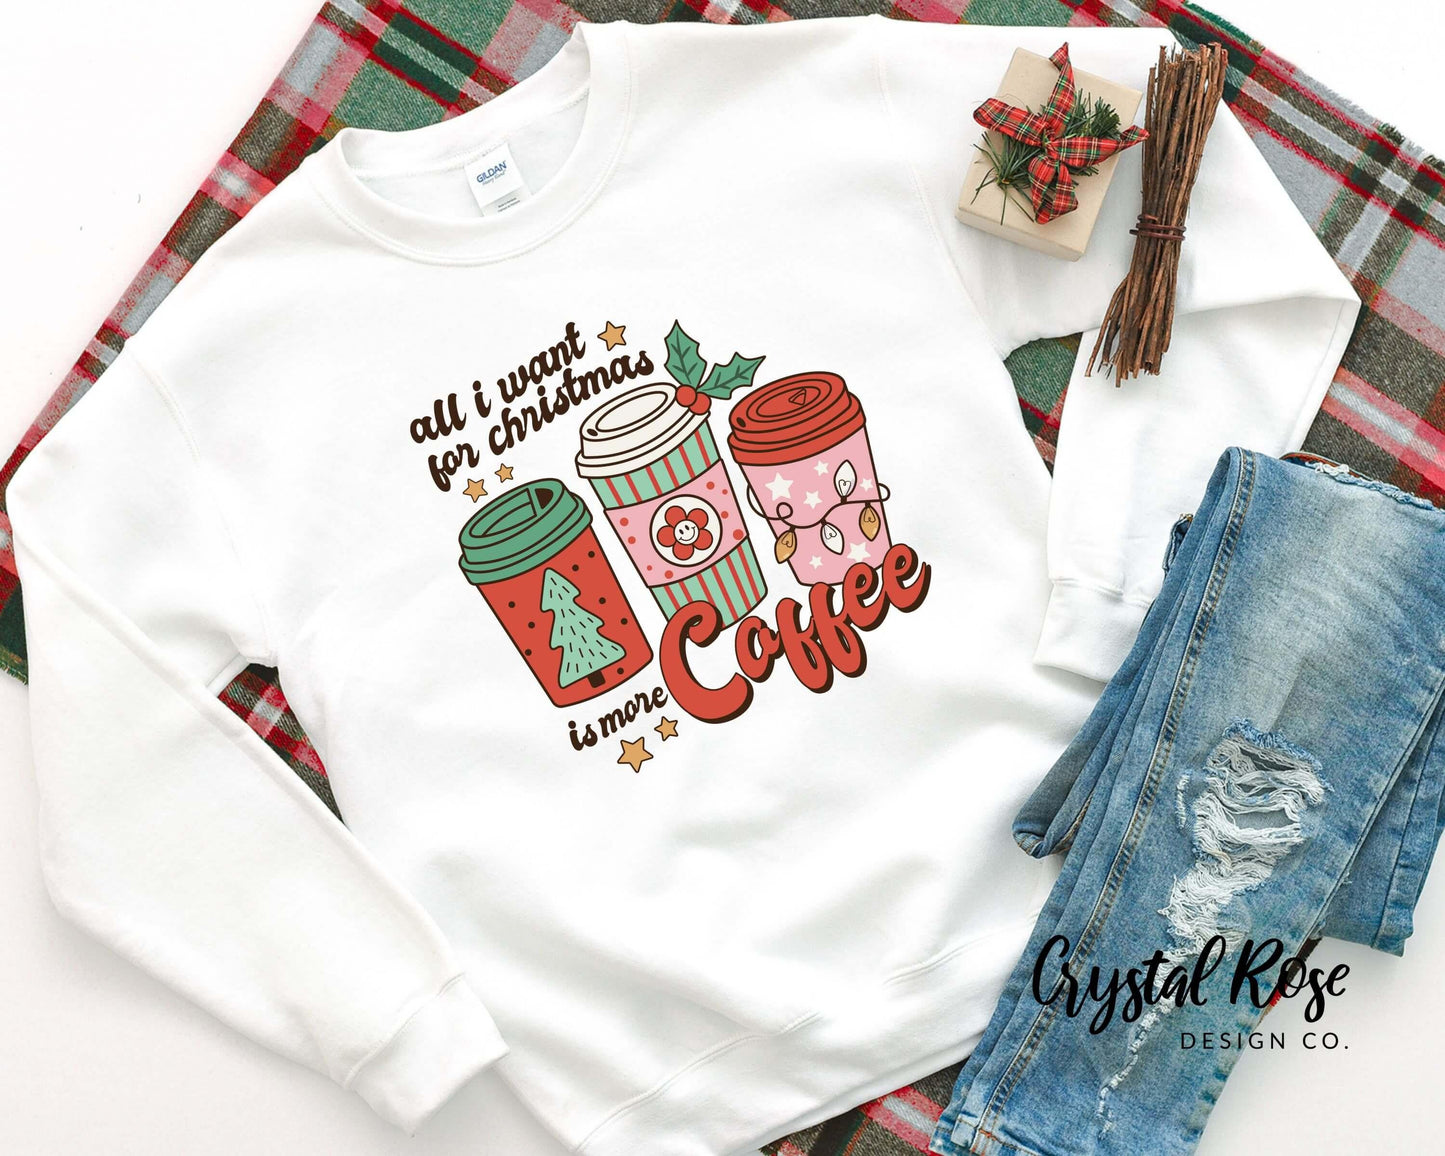 All I want For Christmas Is More Coffee Christmas Crewneck Sweater - Crystal Rose Design Co.